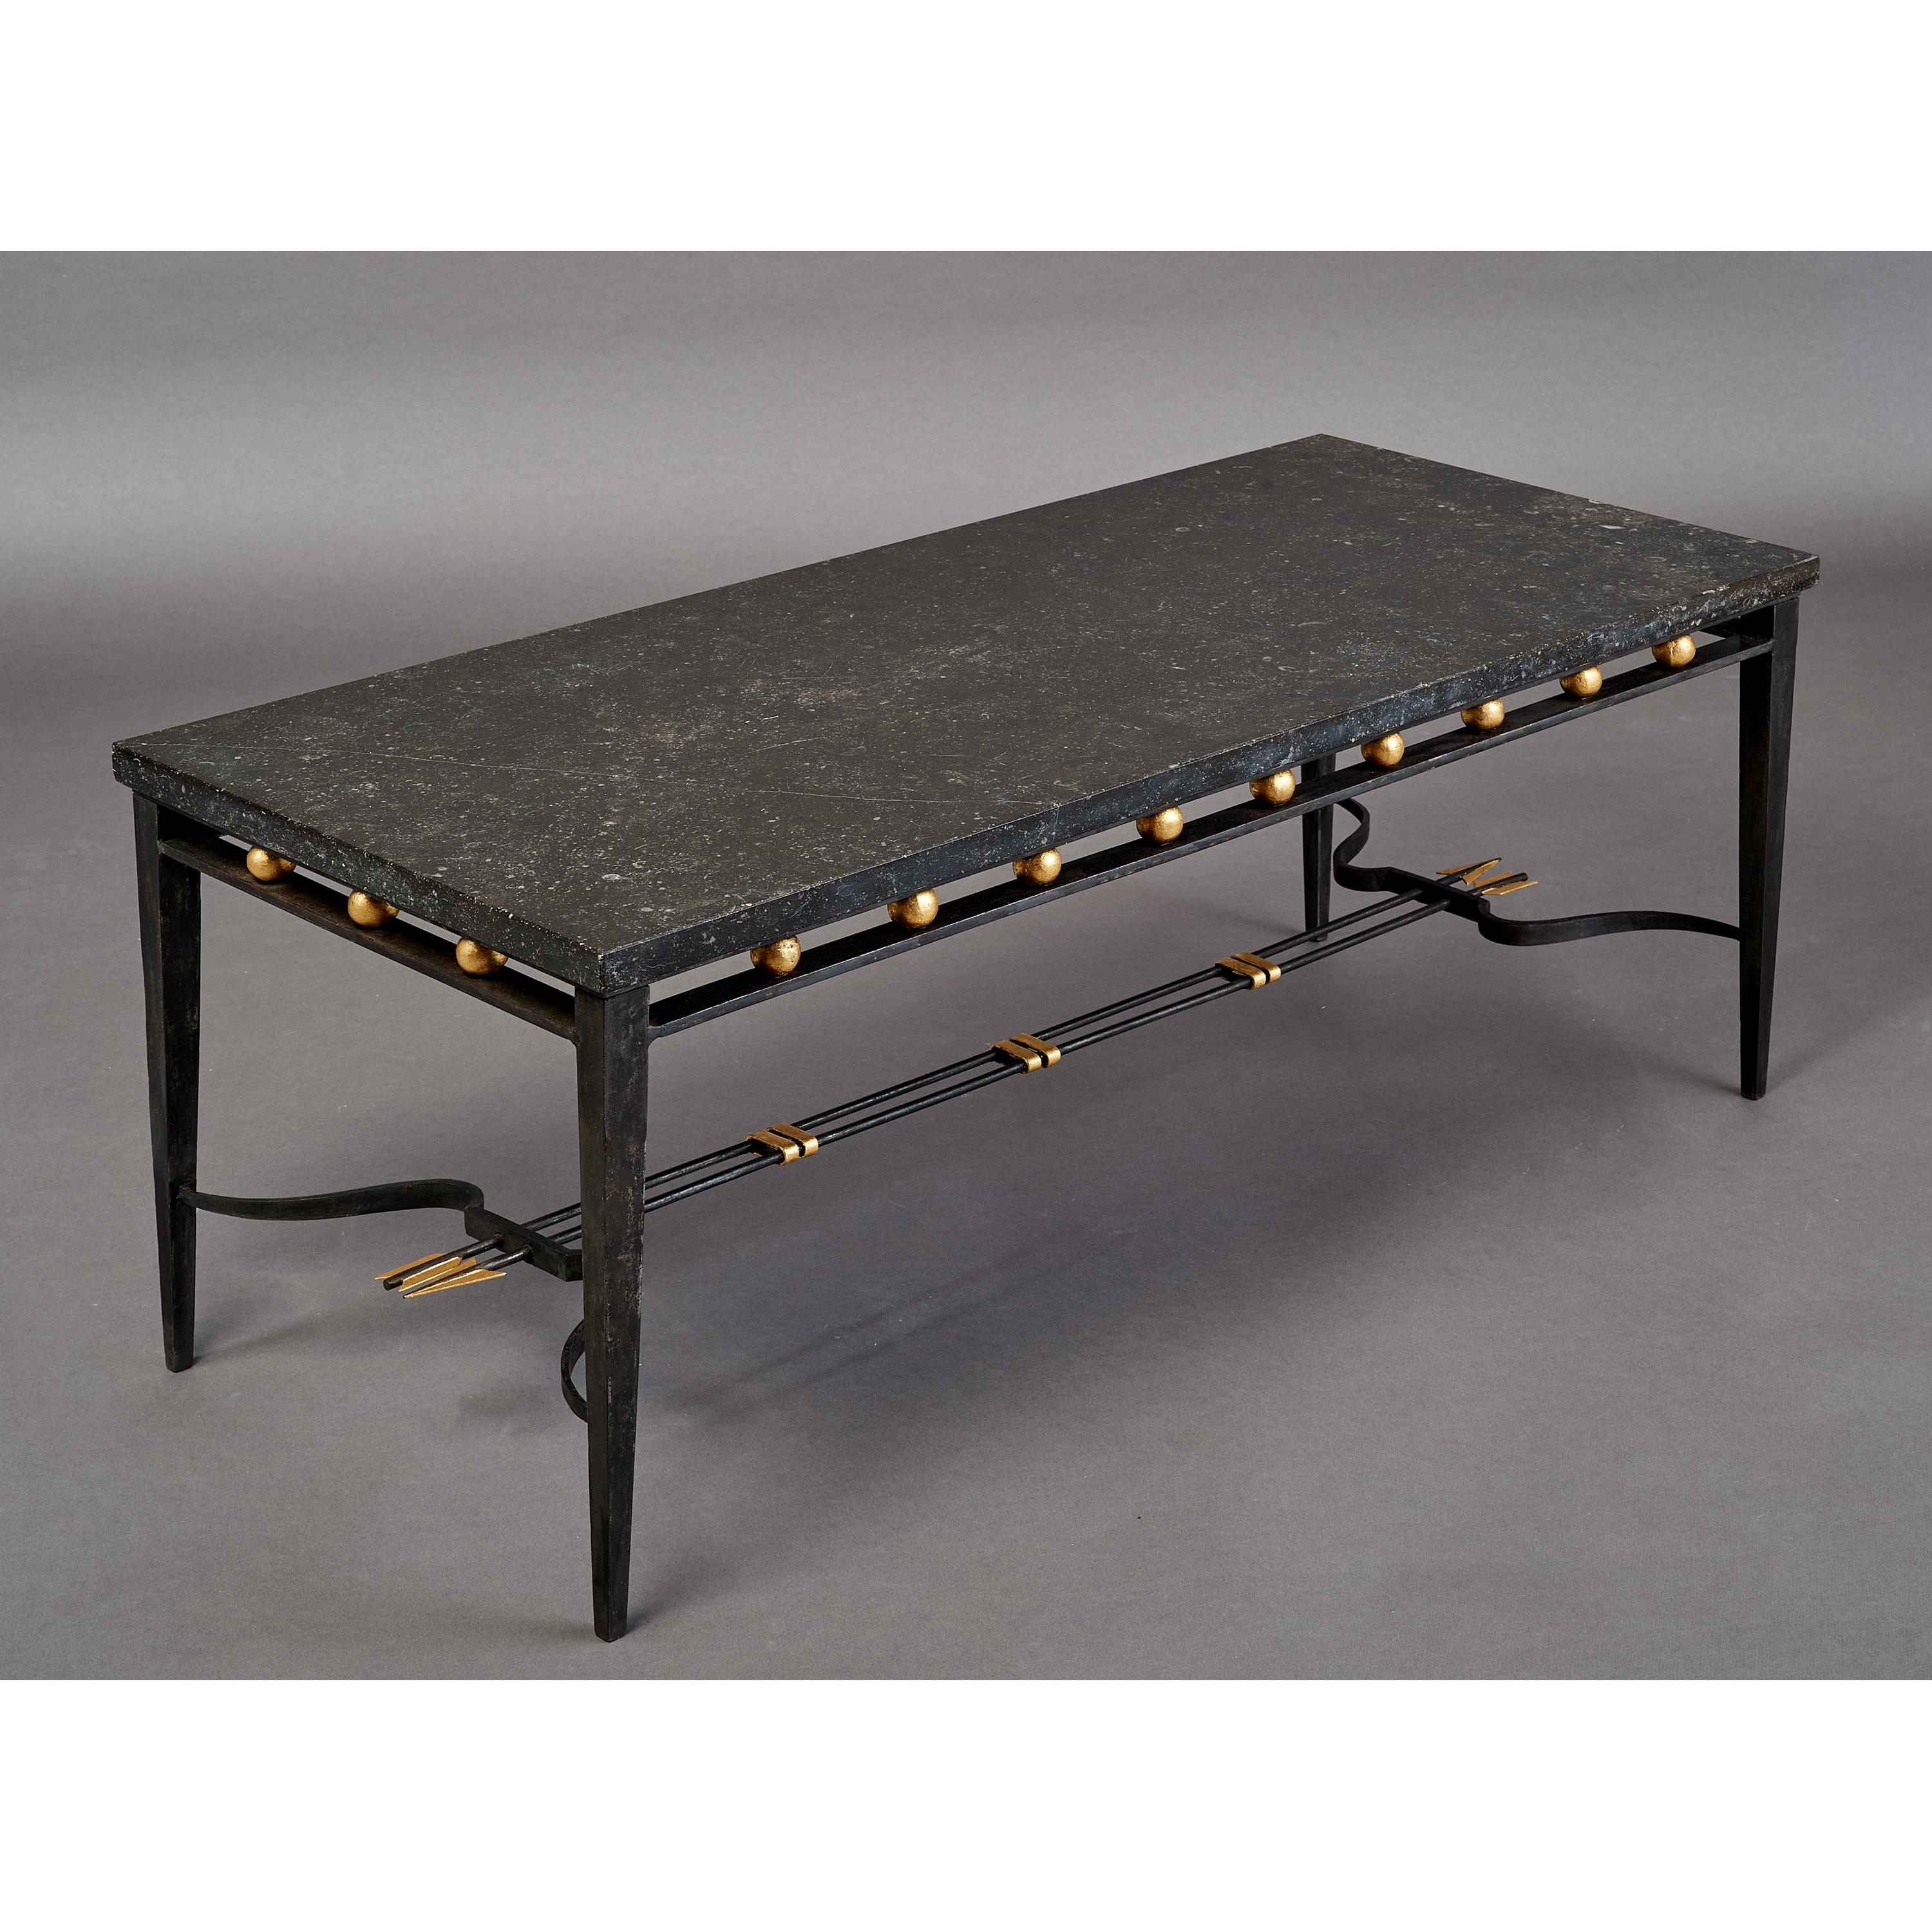 FRANCE, 1950's
Imposing wrought iron coffee table with Neo classical gilt decor of bows and arrows, the massive 1 